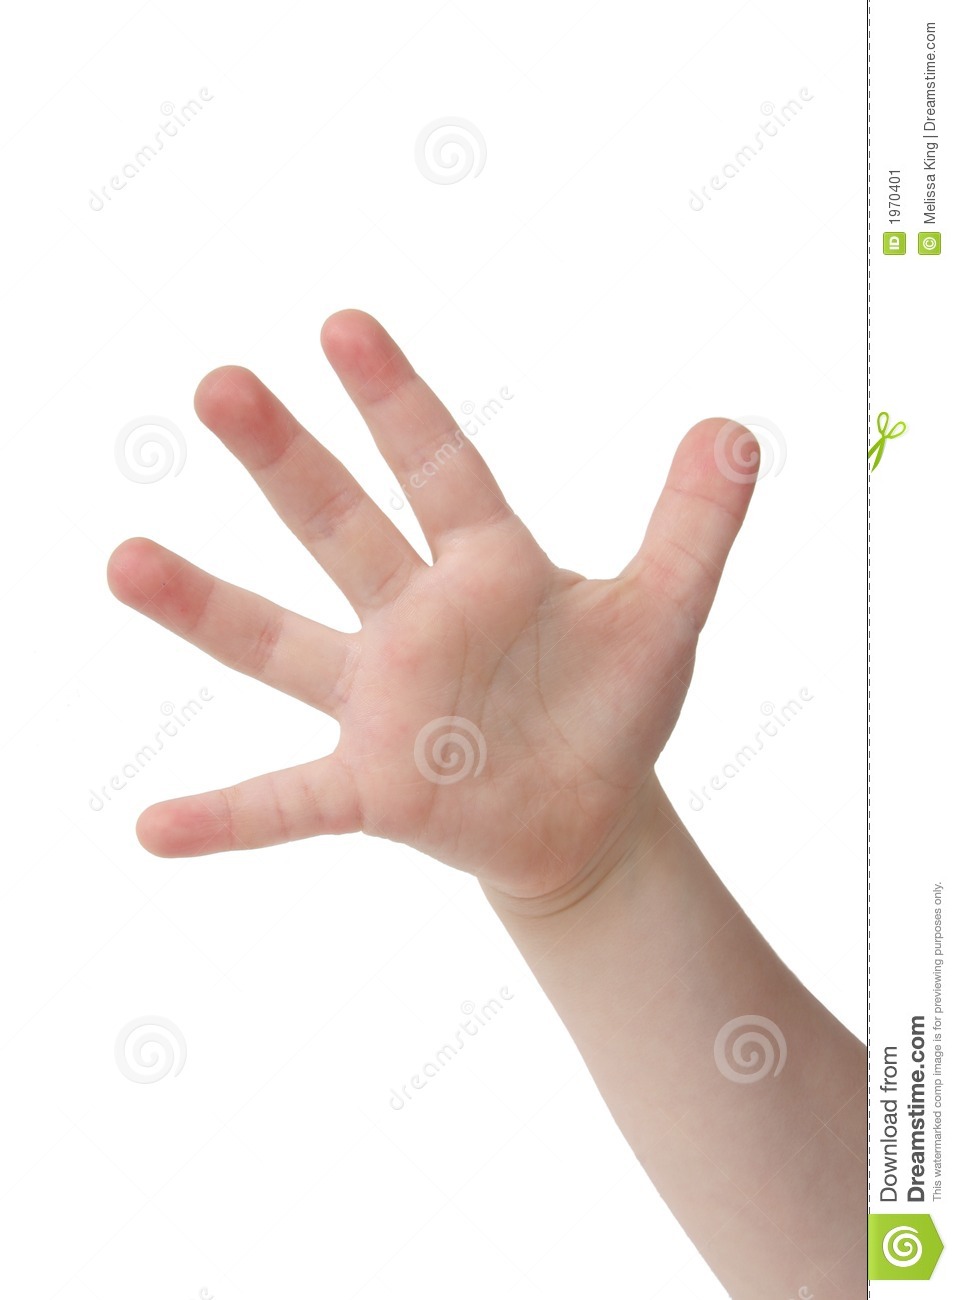 Five Fingers Stock Image   Image  1970401